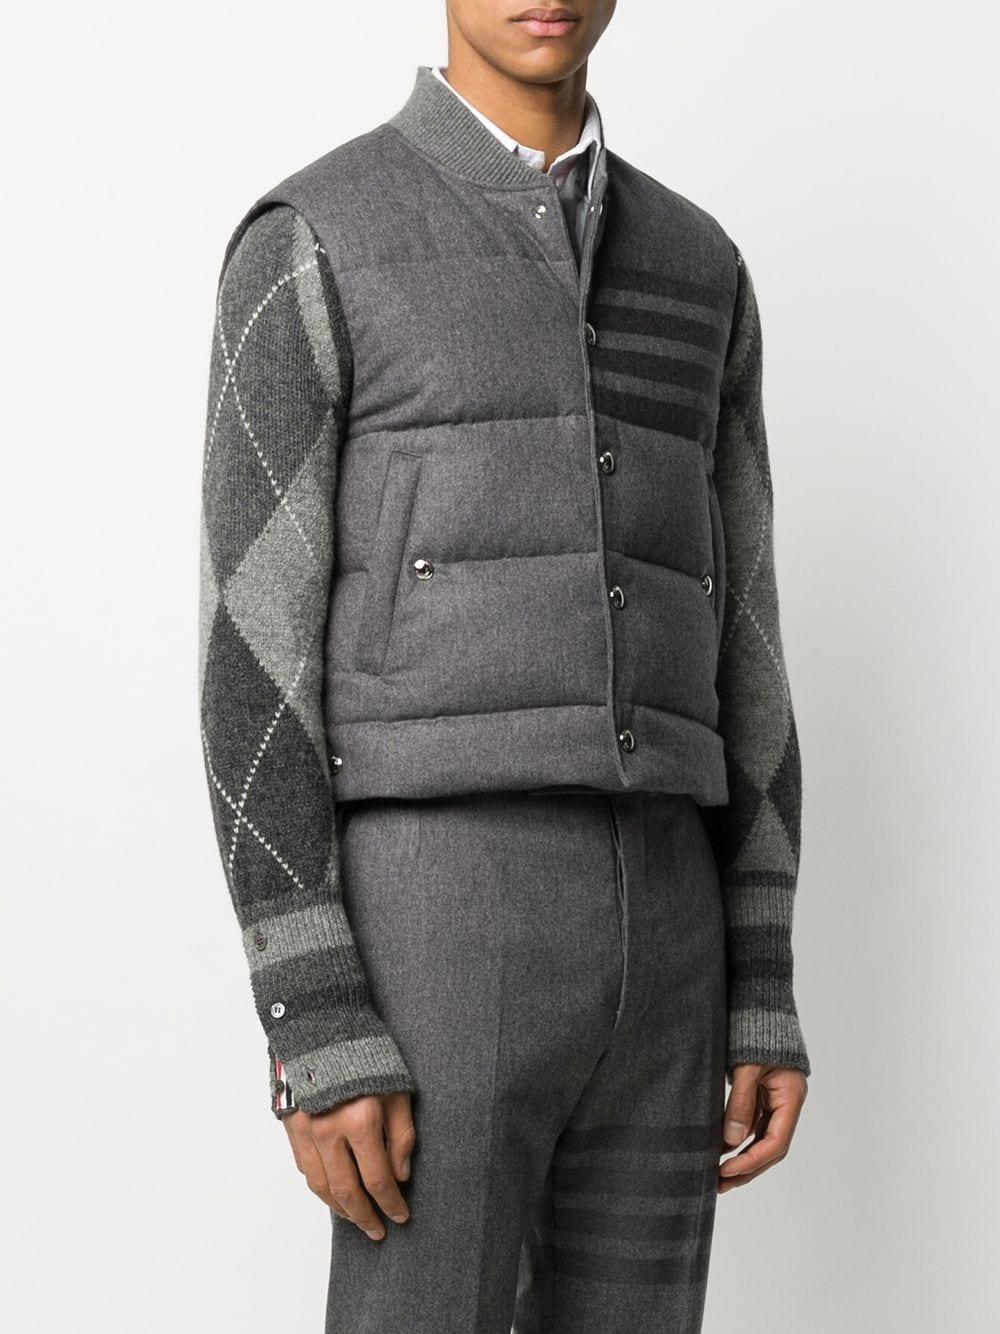 Thom Browne Flannel Downfilled 4-bar Vest in Grey (Gray) for Men - Lyst